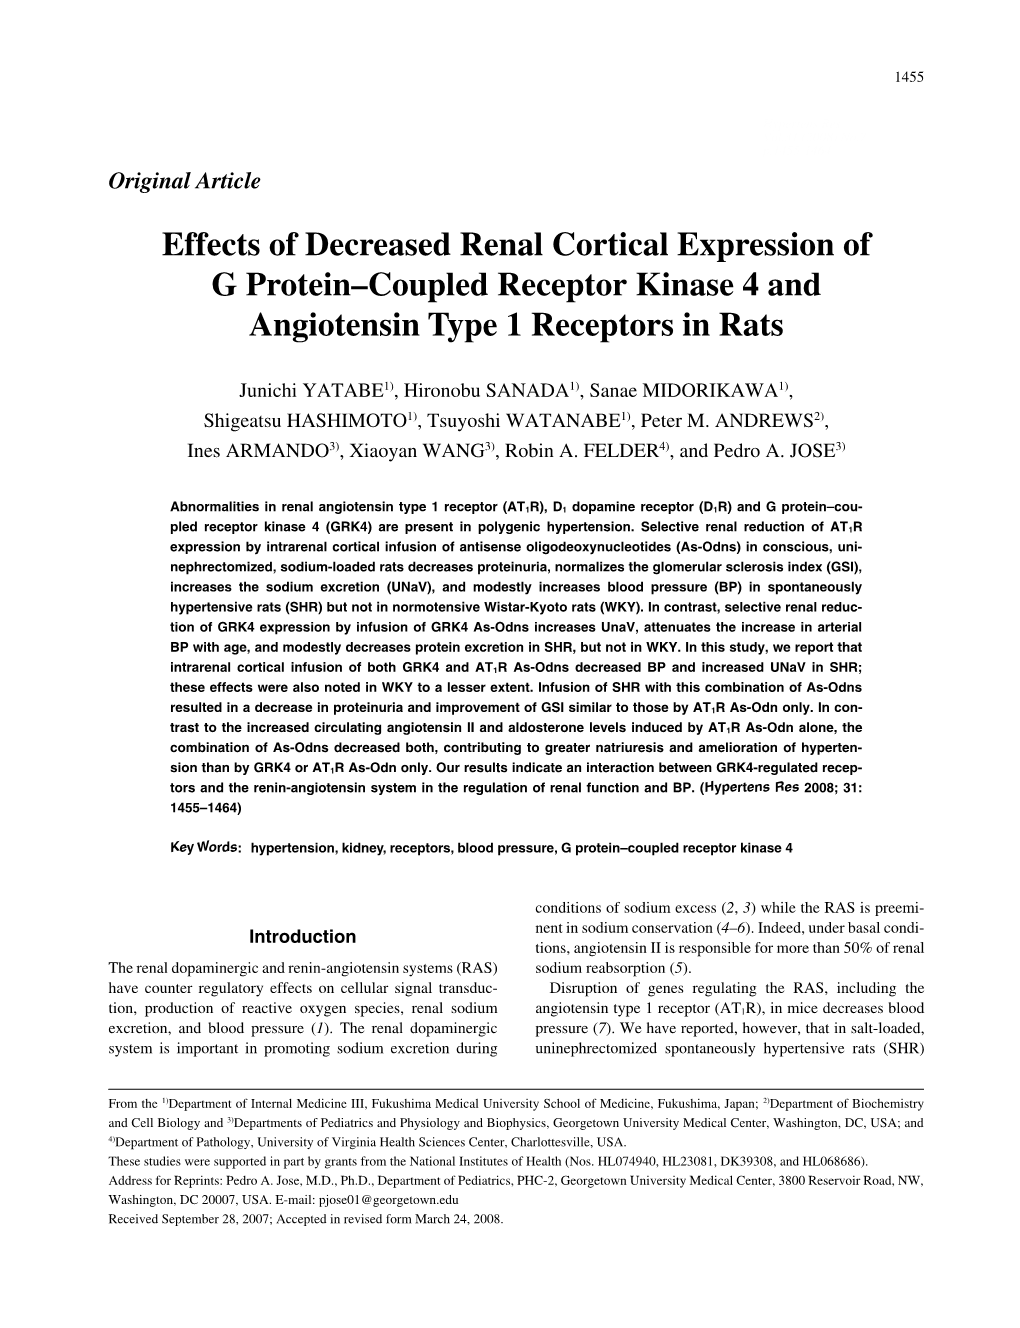 Effects of Decreased Renal Cortical Expression of G Protein–Coupled Receptor Kinase 4 and Angiotensin Type 1 Receptors in Rats